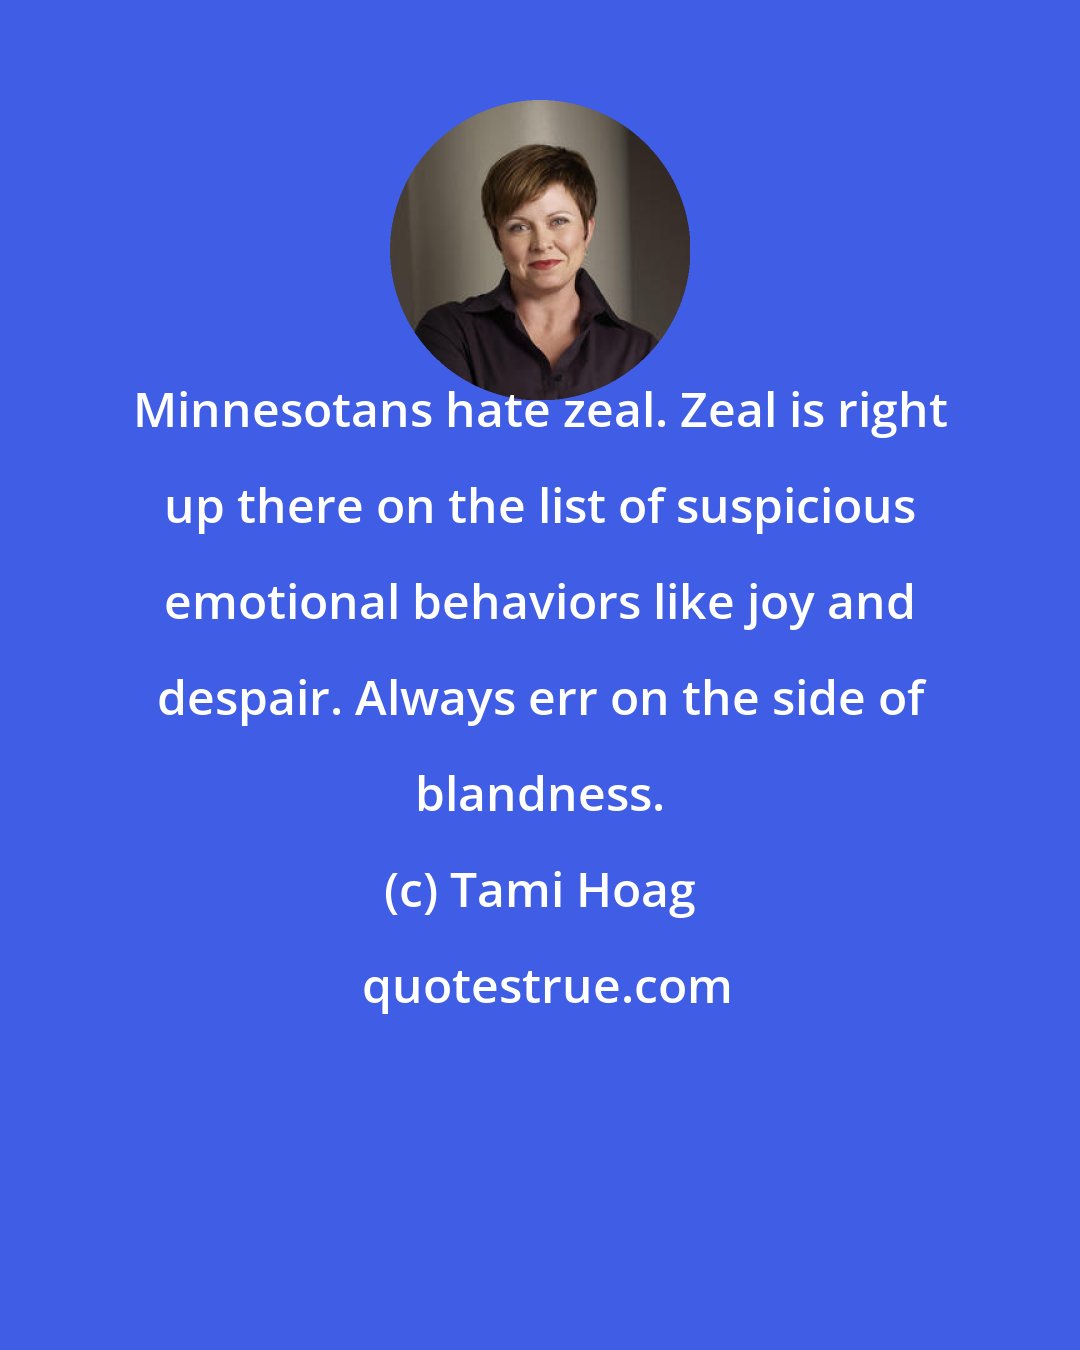 Tami Hoag: Minnesotans hate zeal. Zeal is right up there on the list of suspicious emotional behaviors like joy and despair. Always err on the side of blandness.